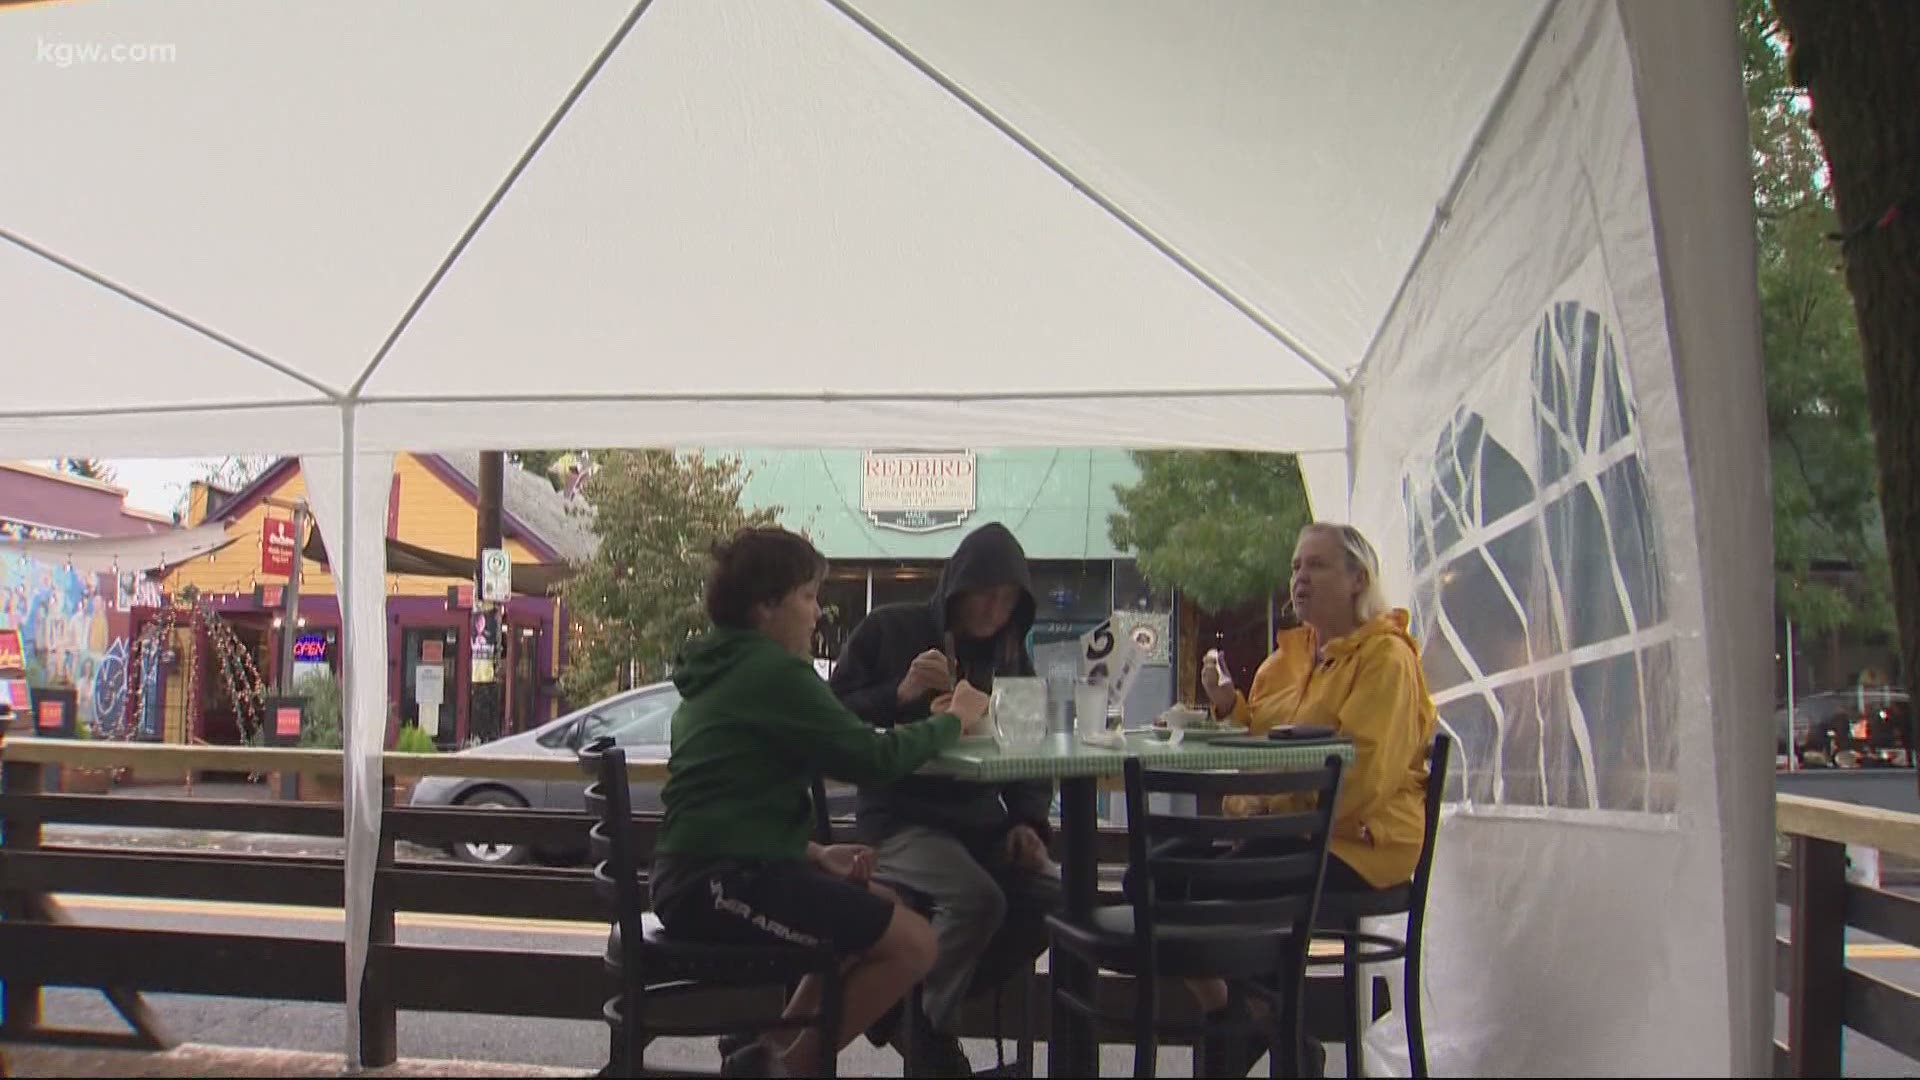 Restaurants in Portland will need to winterize outdoor seating if the city allows for an extension beyond next month.